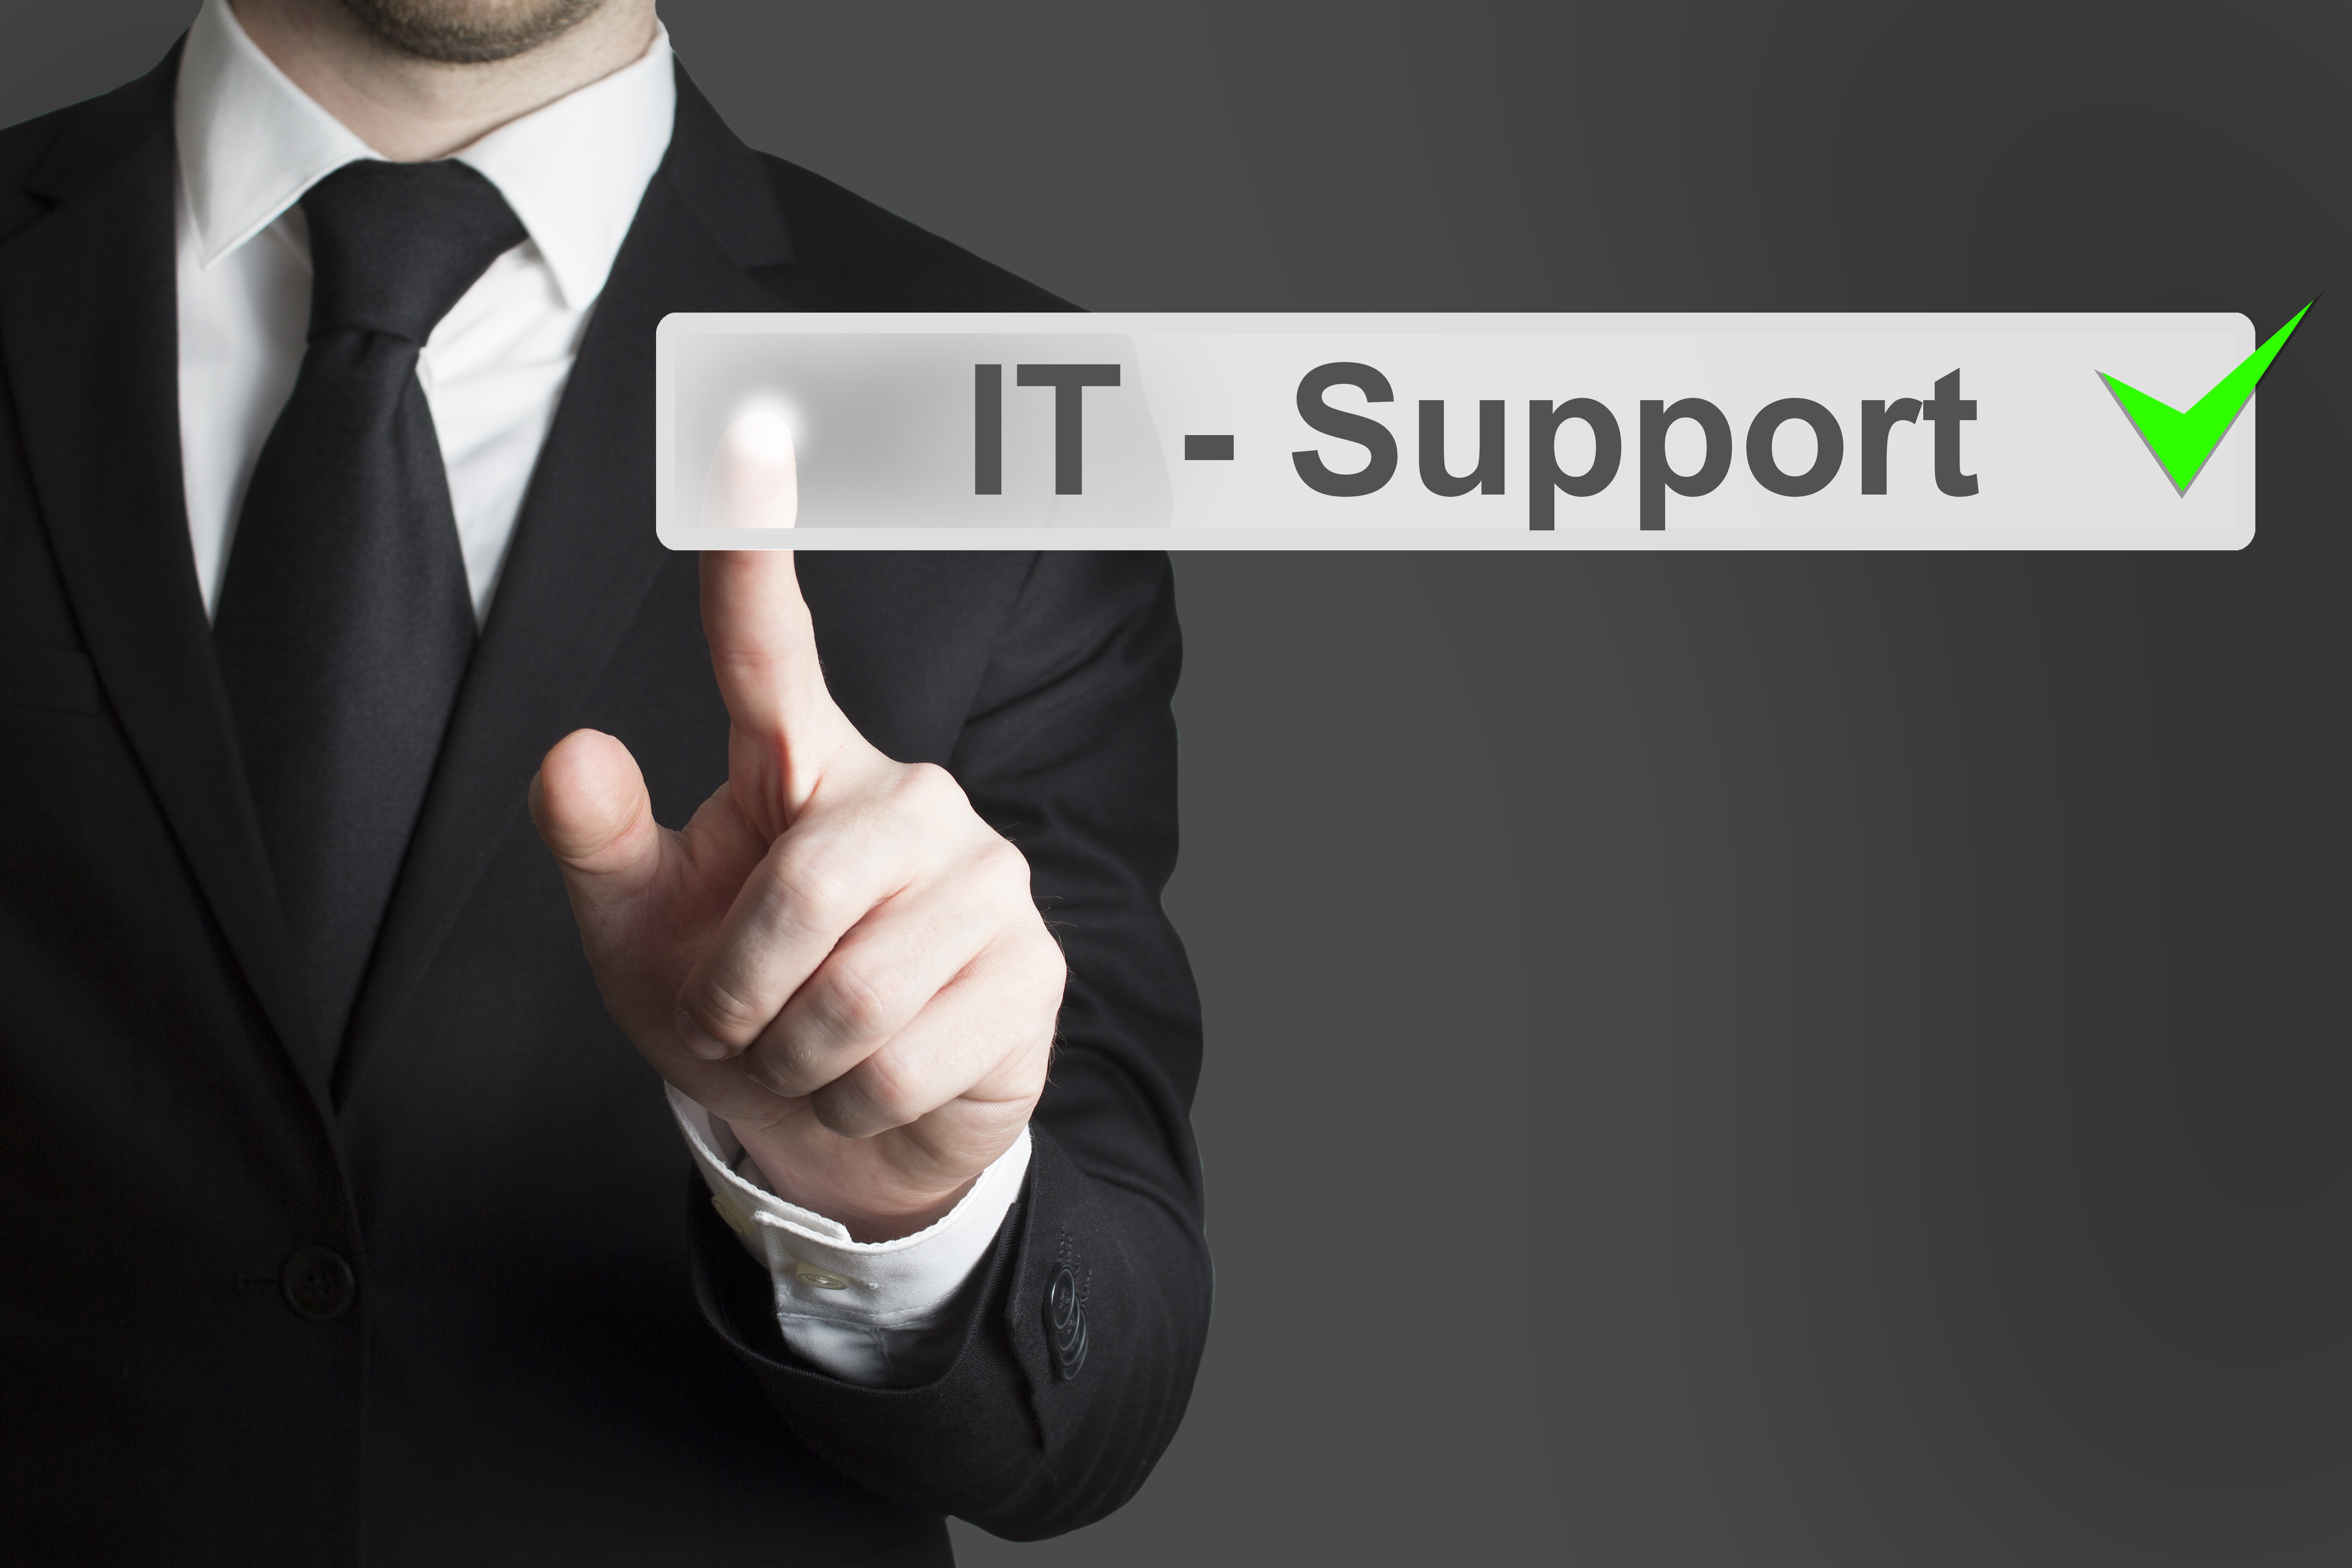 Why IT Support is important